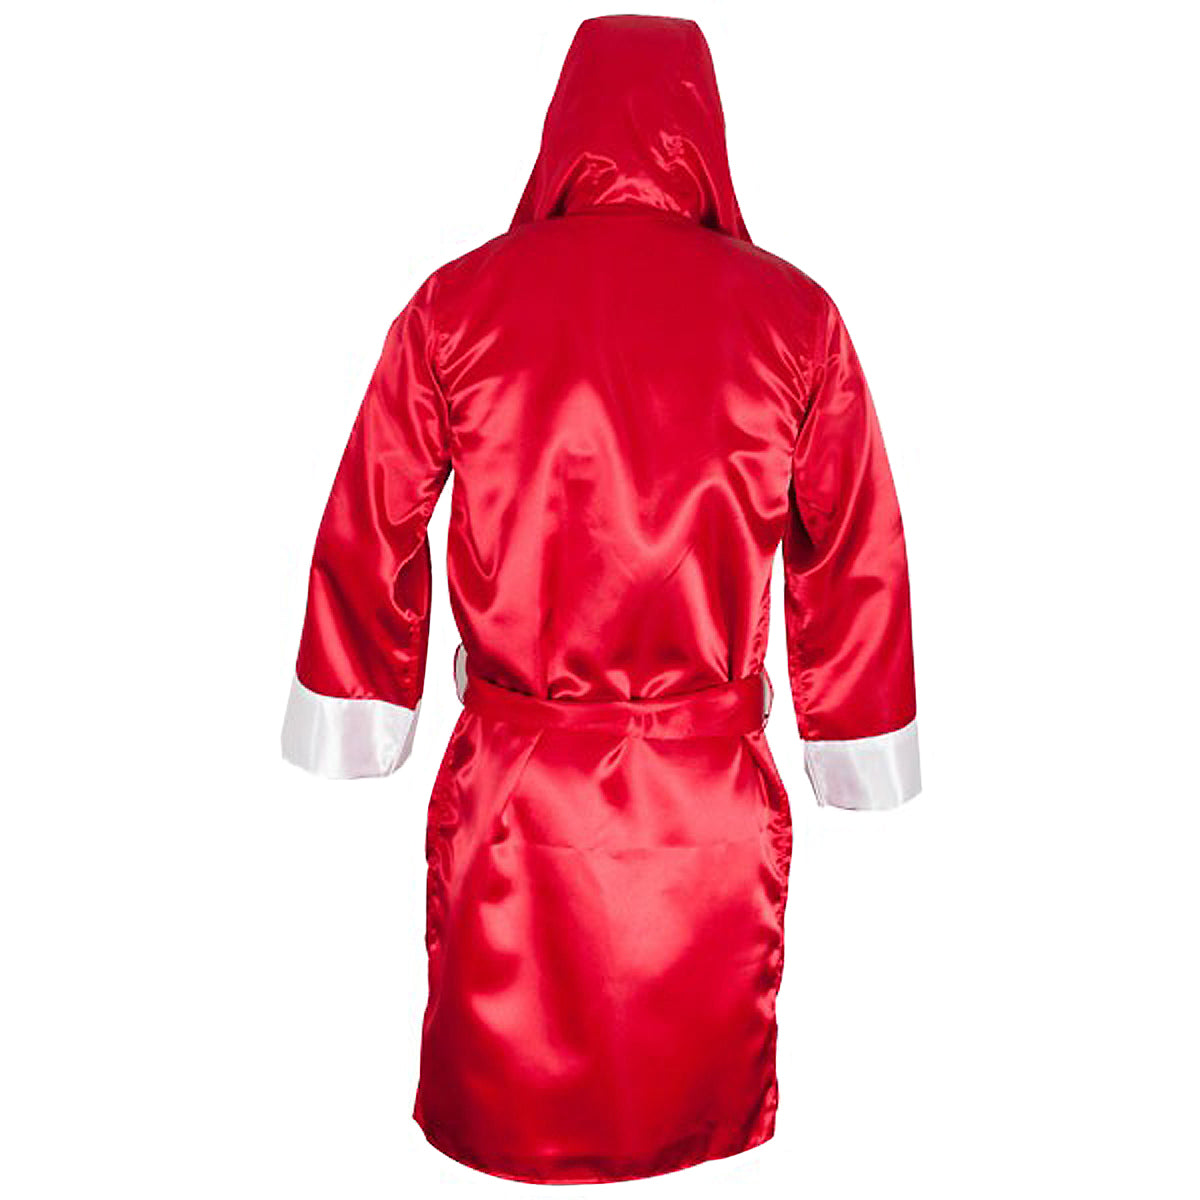 Cleto Reyes Satin Boxing Robe with Hood - Small - Red/White Cleto Reyes